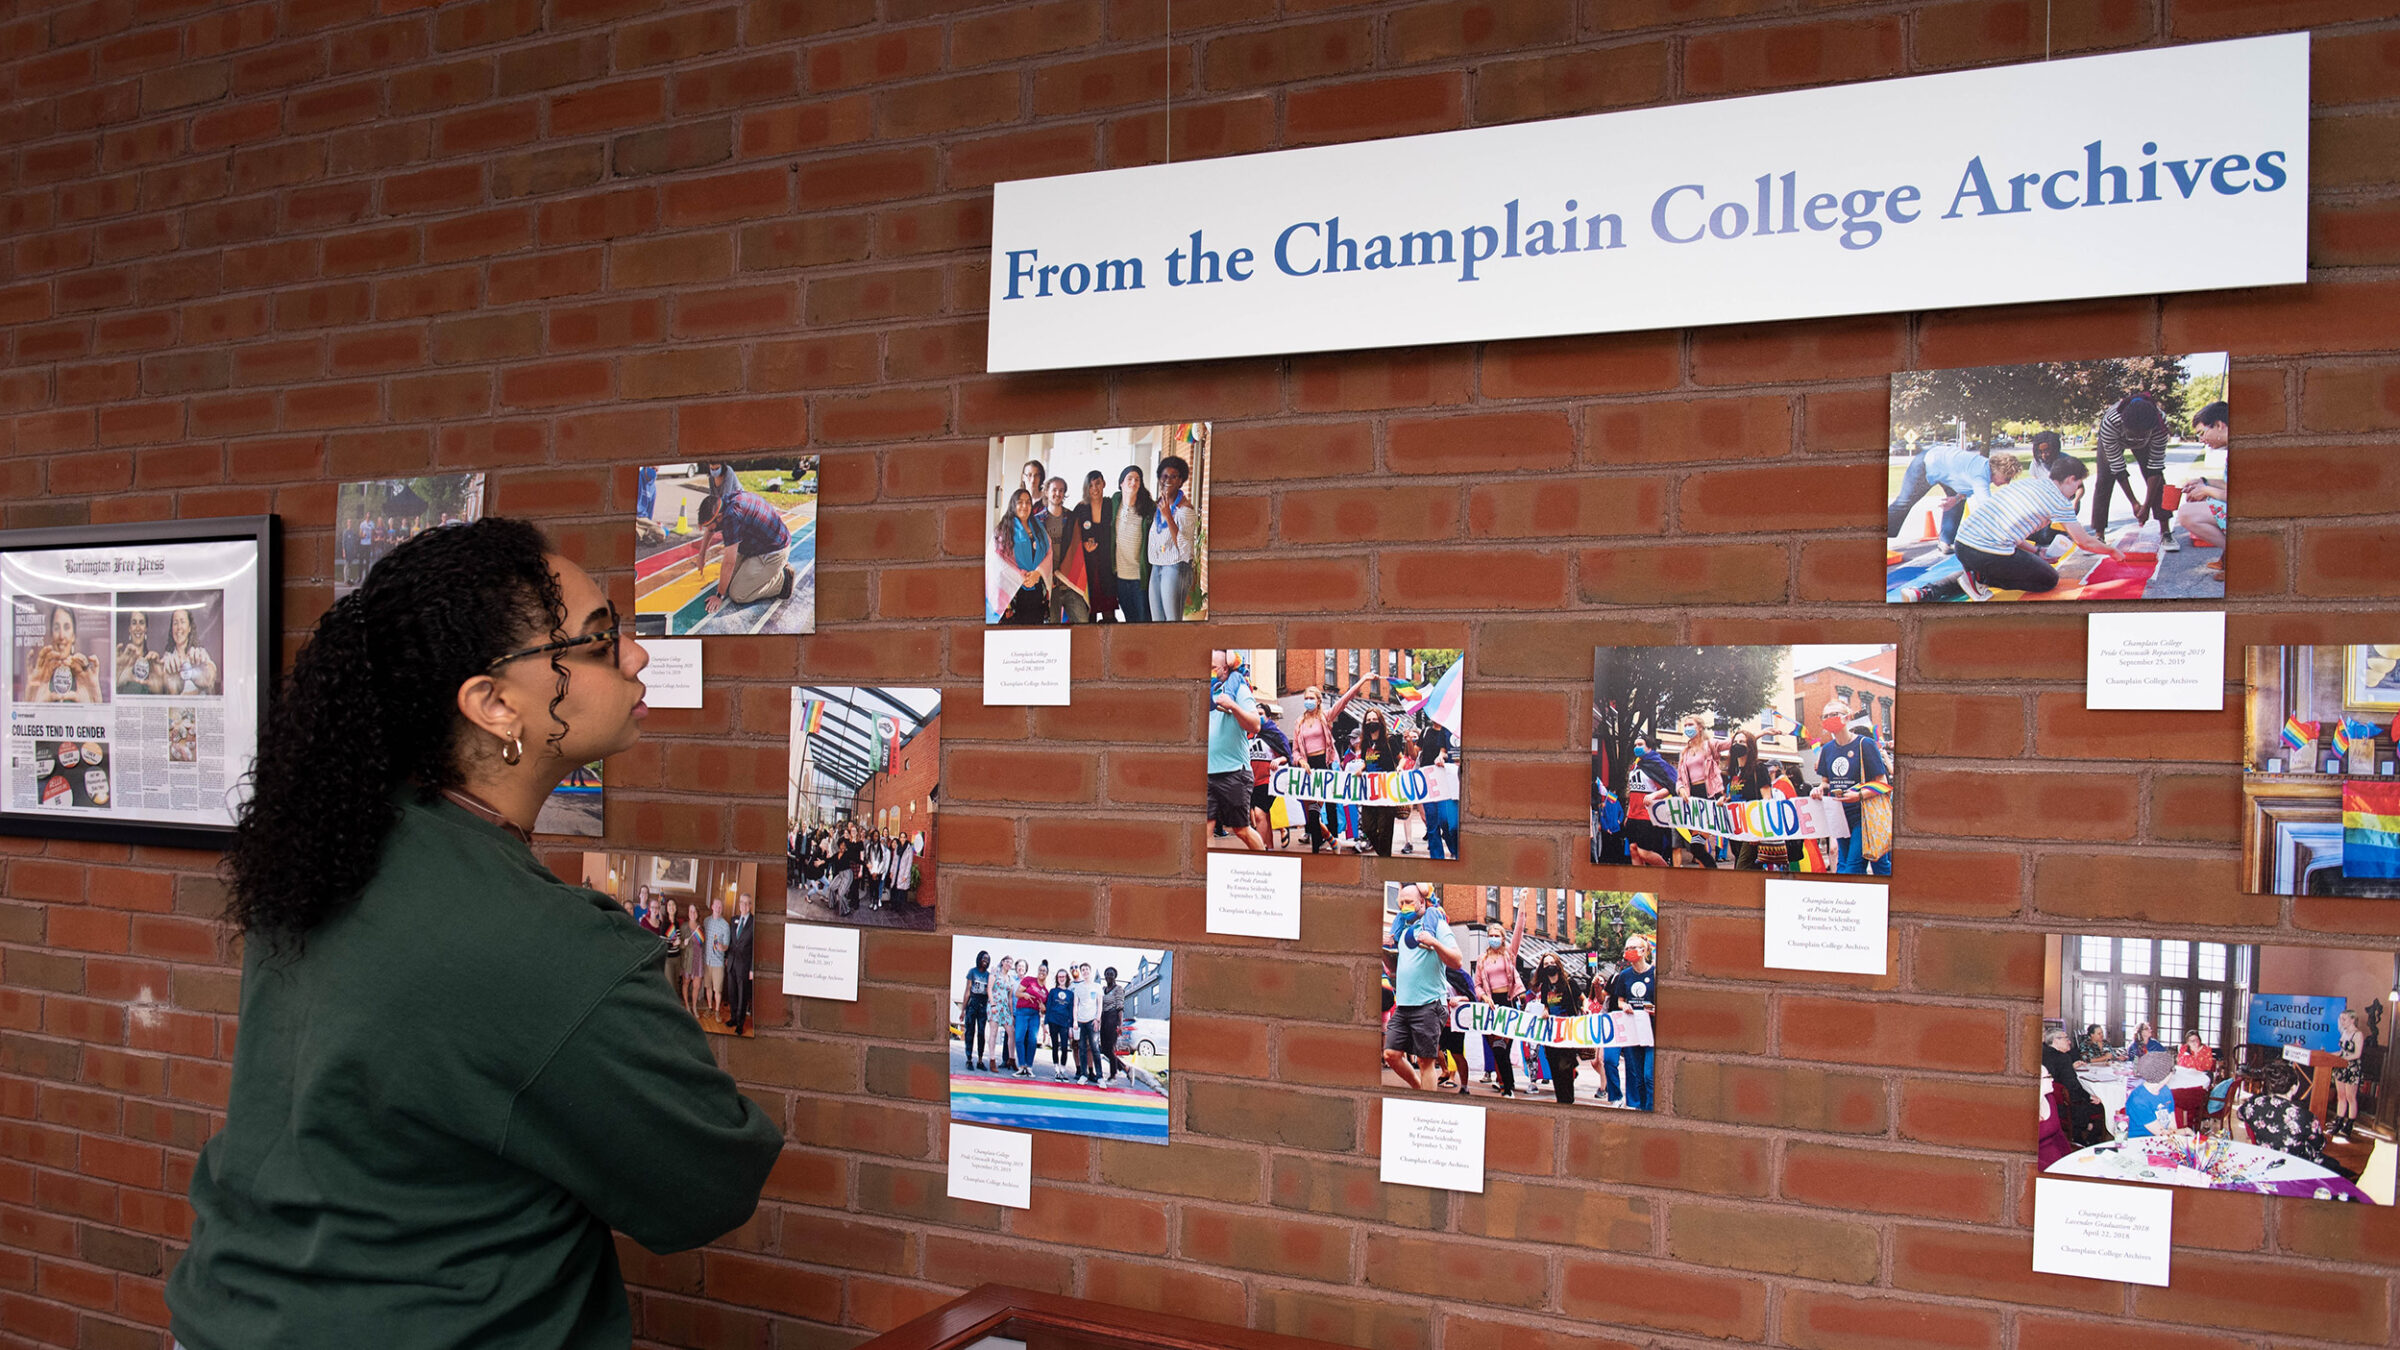 a student looks at photos from the Champlain College Archives hung on a brick wall. The photographs depict contemporary people and are quite colorful with many rainbows.